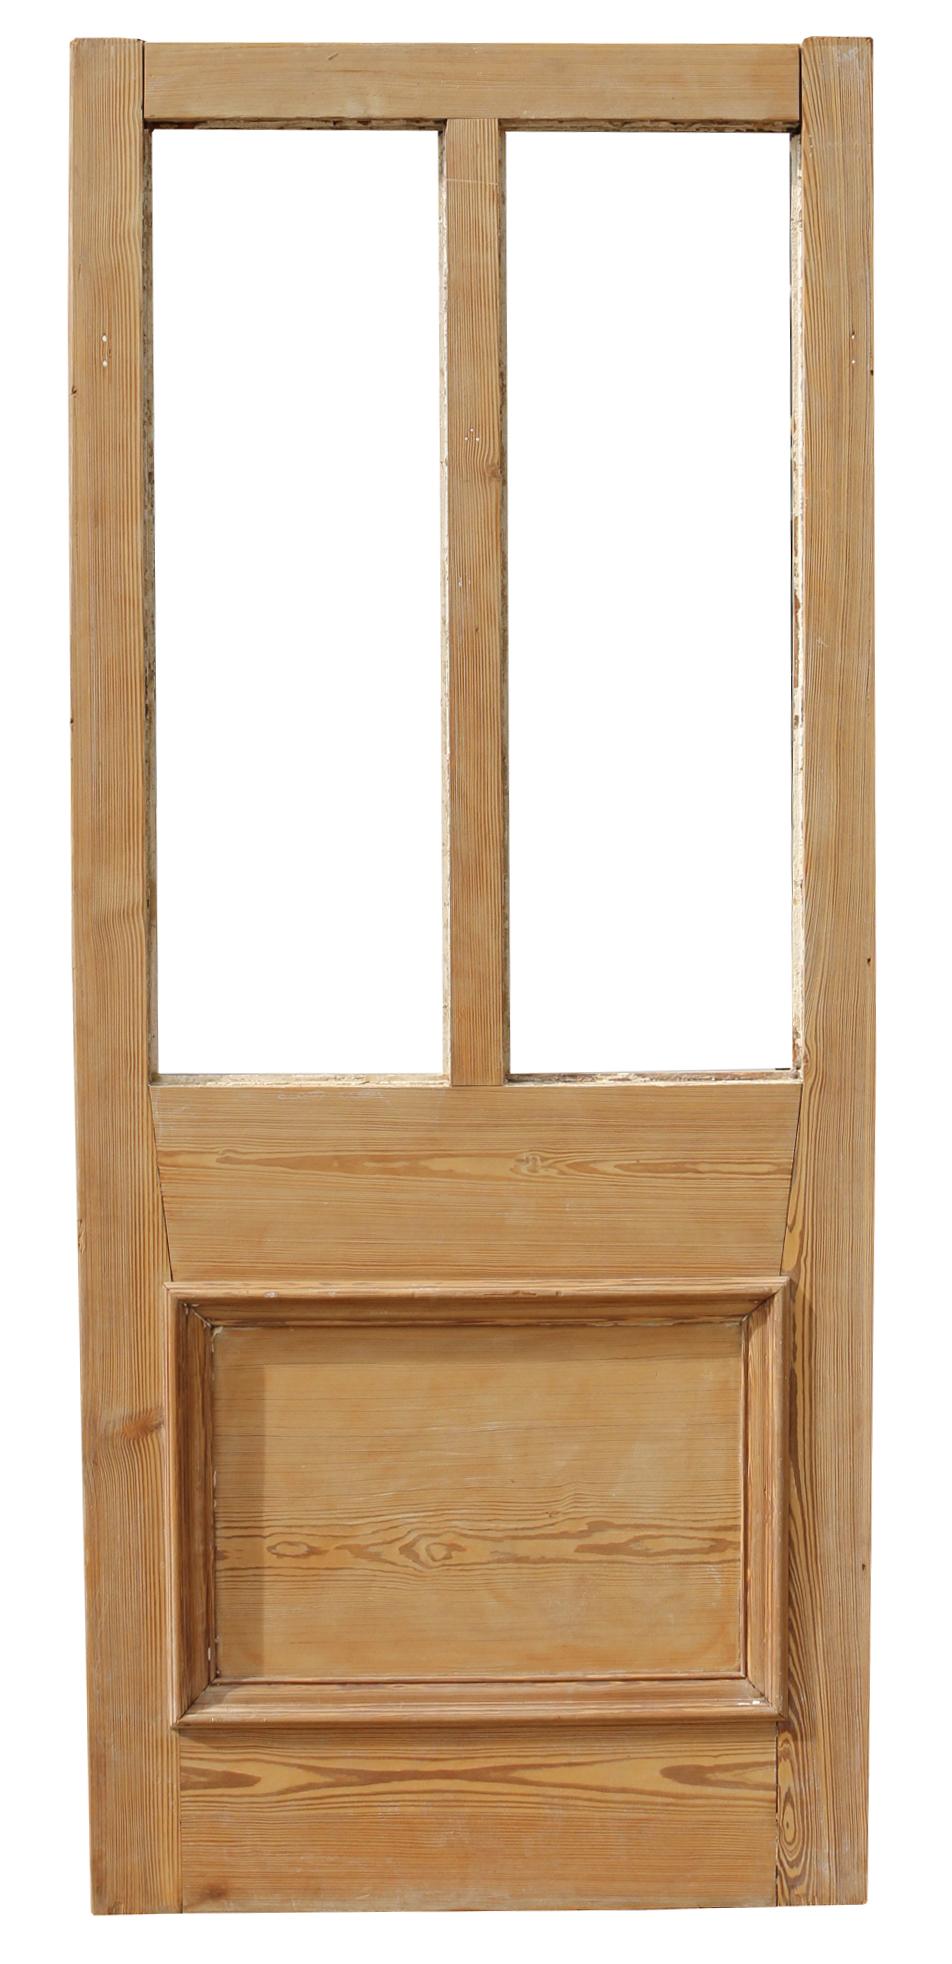 A reclaimed exterior door made from pine, with two spaces for glazing.